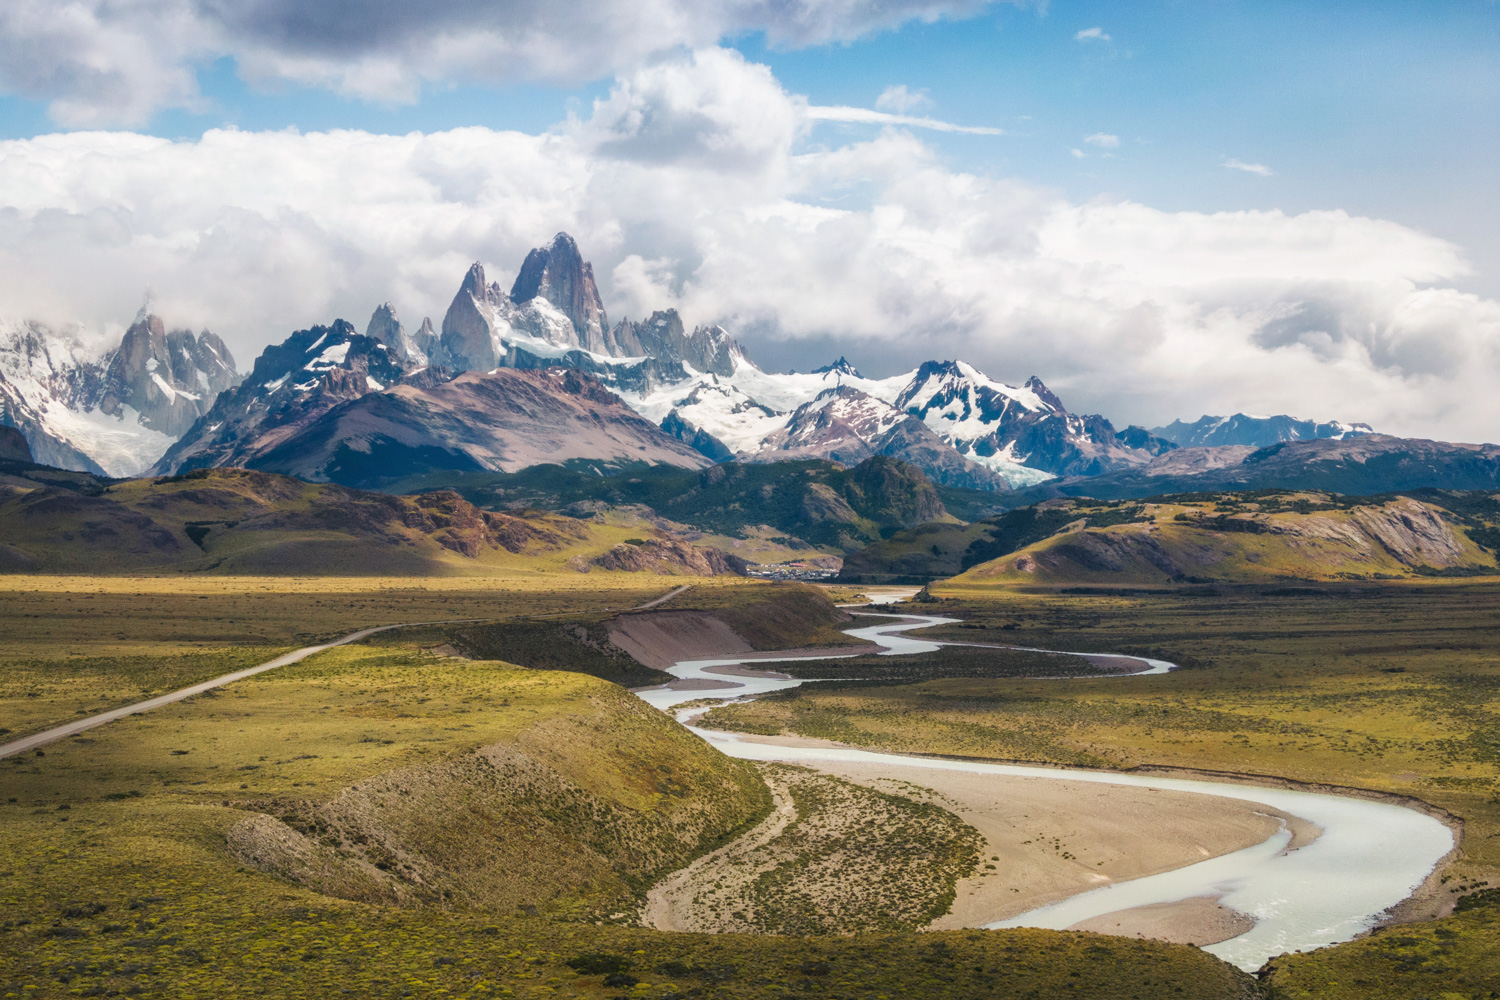 Santiago & Patagonia: From Chile to Argentina - 13 Days